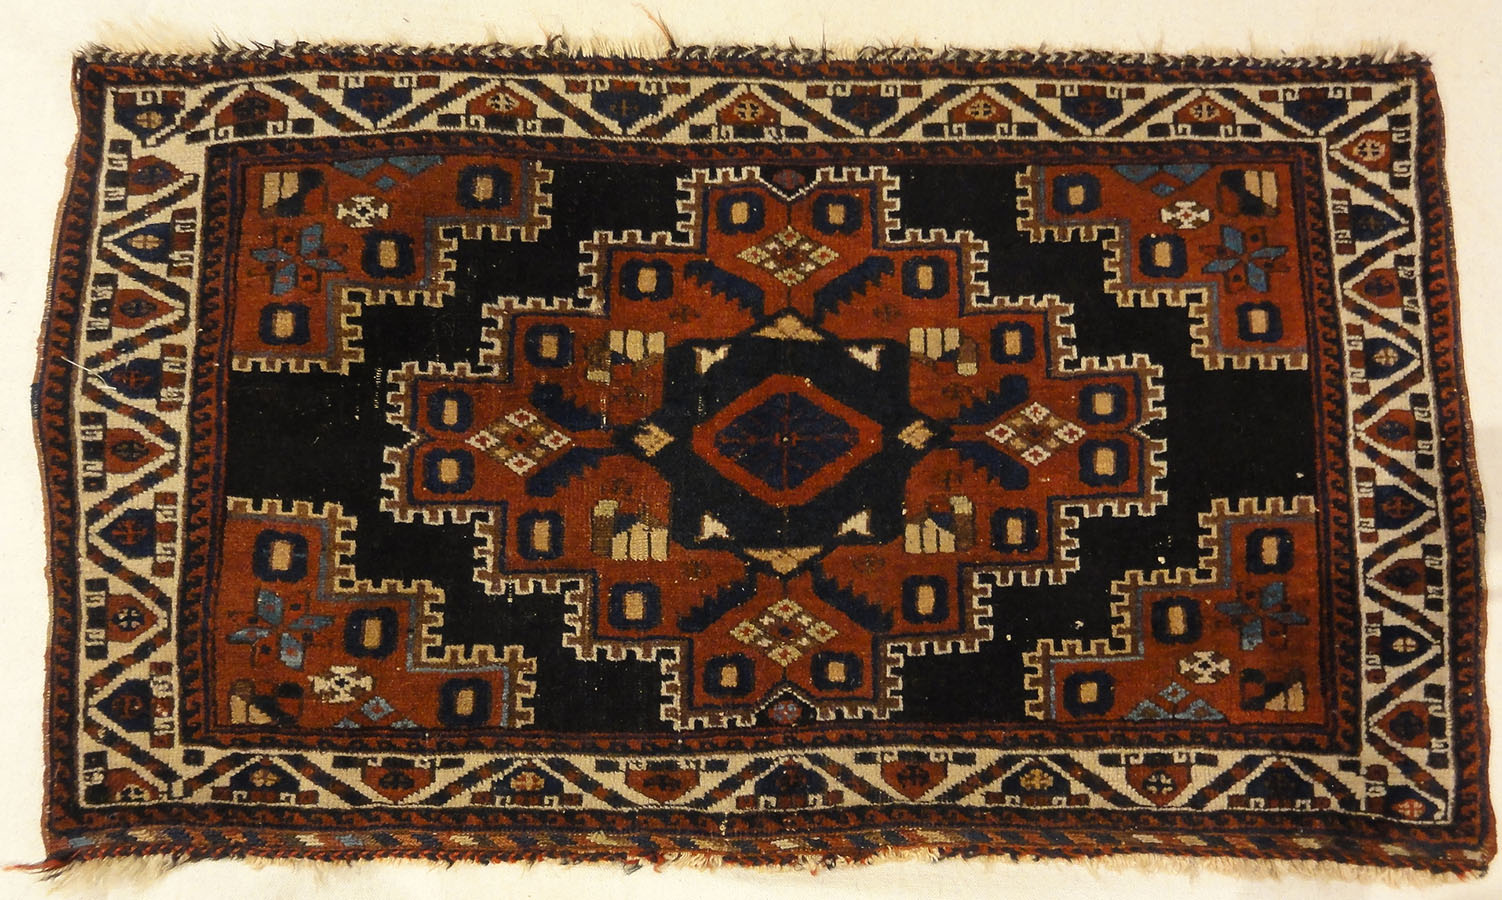 Fine Southwest Persian Afshar Bagface. A piece of woven carpet art sold by the Santa Barbara Design Center Rugs and More in Santa Barbara, California.